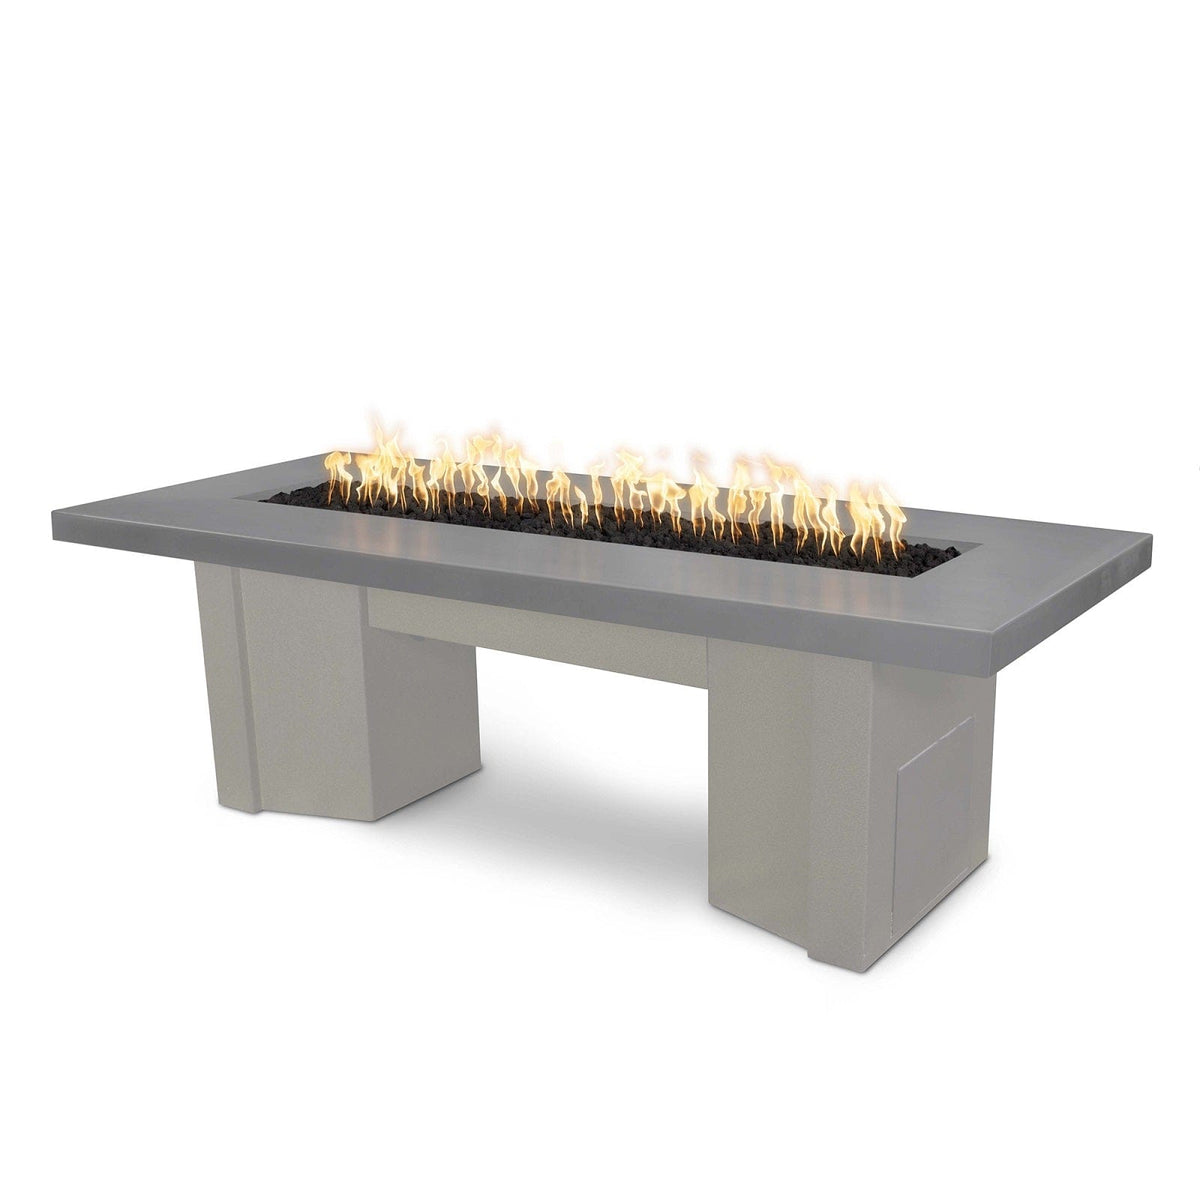 The Outdoor Plus Fire Features Natural Gray (-NGY) / Pewter Powder Coated Steel (-PEW) The Outdoor Plus 60&quot; Alameda Fire Table Smooth Concrete in Liquid Propane - 110V Plug &amp; Play Electronic Ignition / OPT-ALMGFRC60EKIT-LP